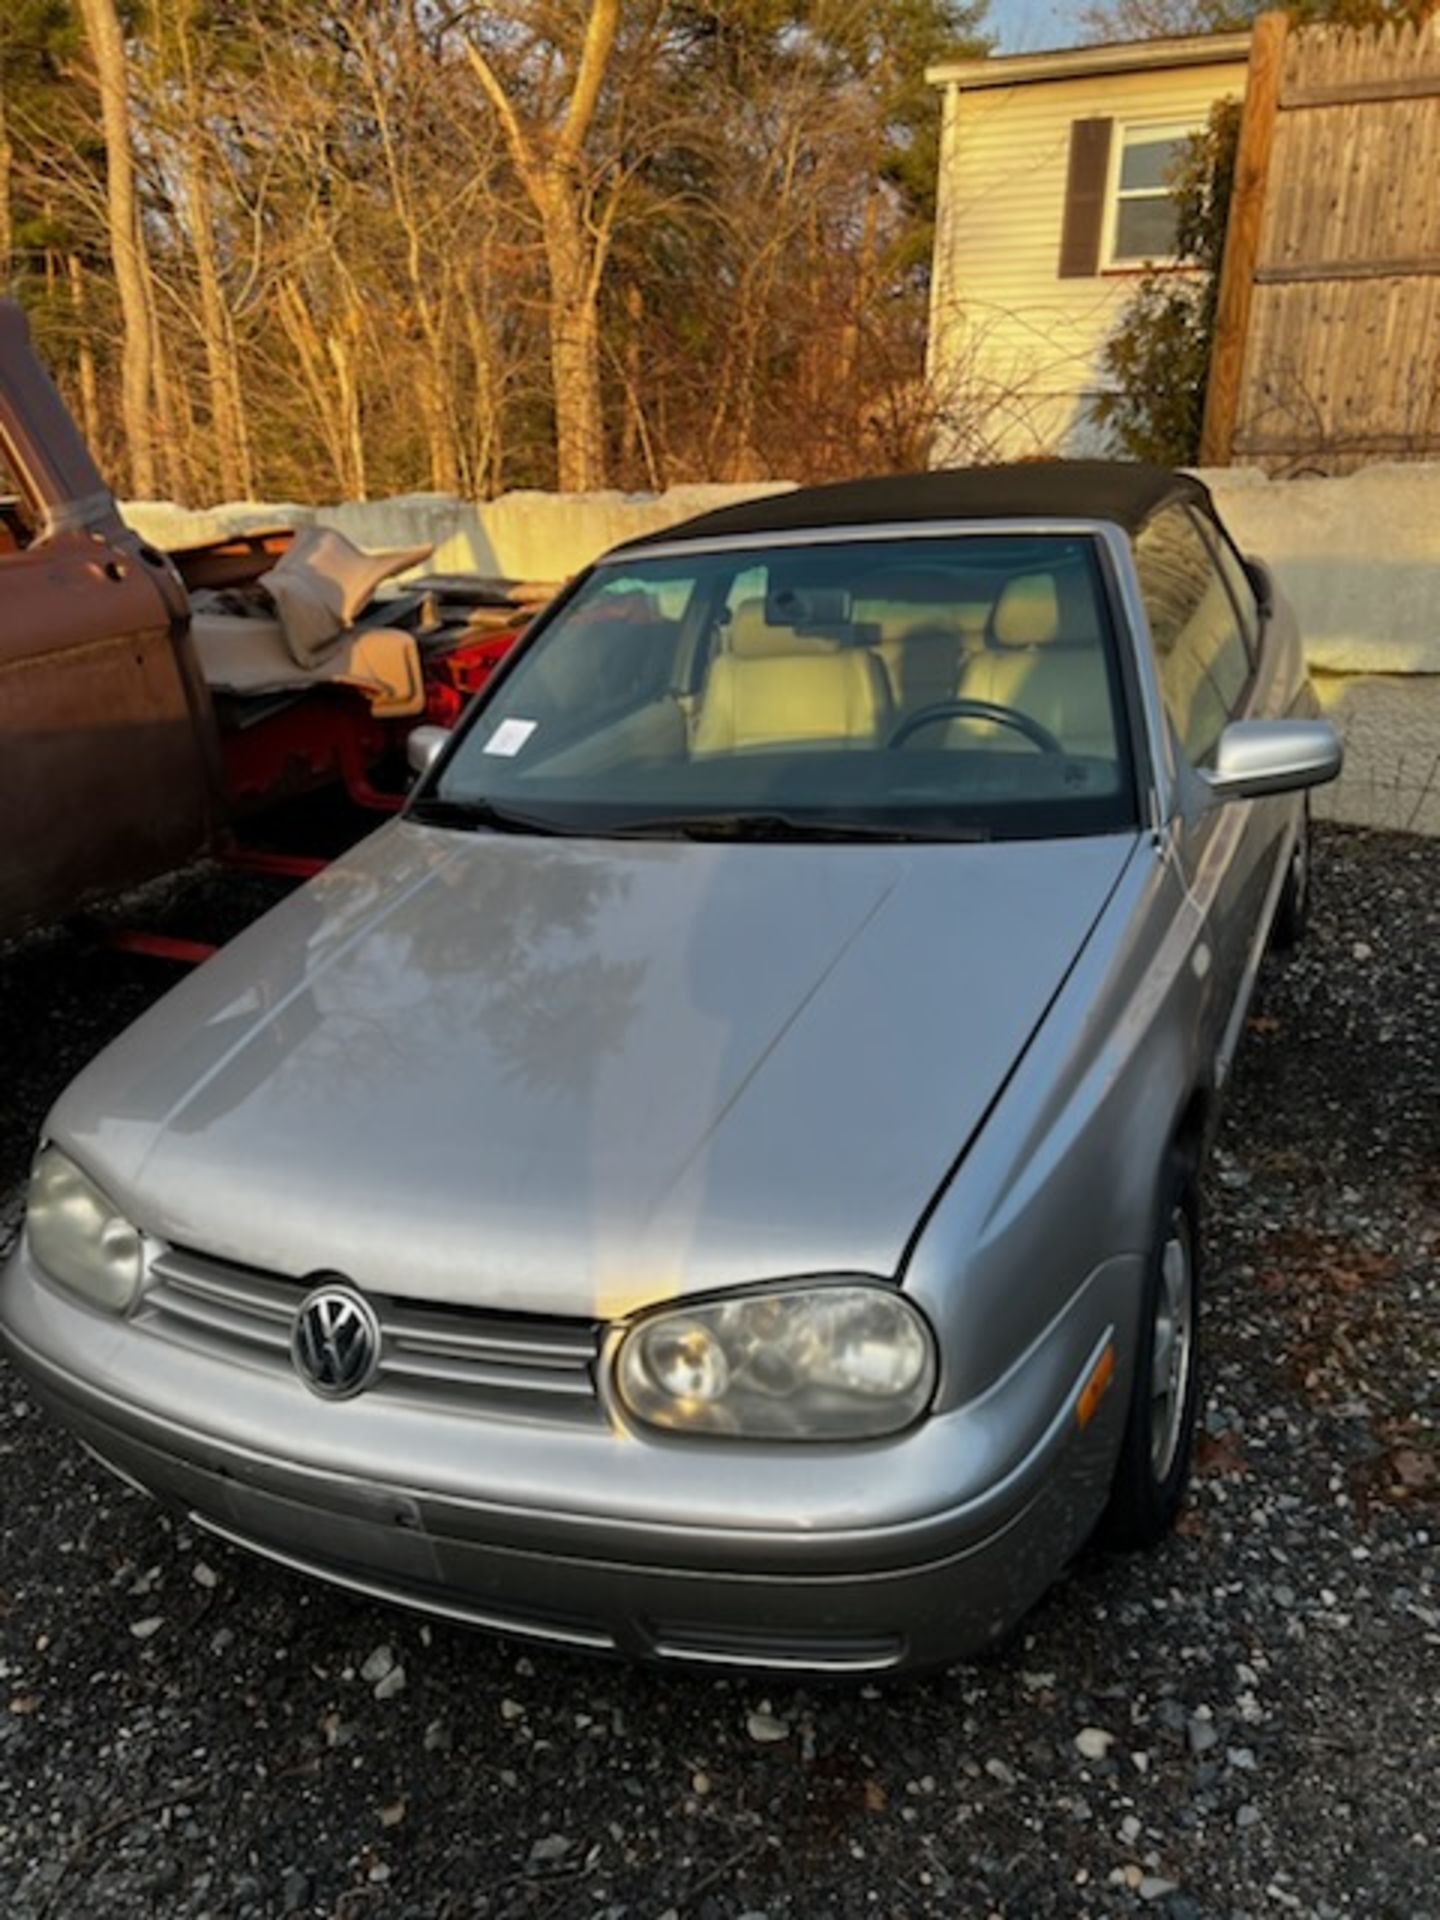 2000 Volkswagon Cabriolet Convertible, 5 Spd,Odom:TBD, Vin#: TBD INFO TO BE ANNOUNCED AT SALE (RUNS) - Image 2 of 4